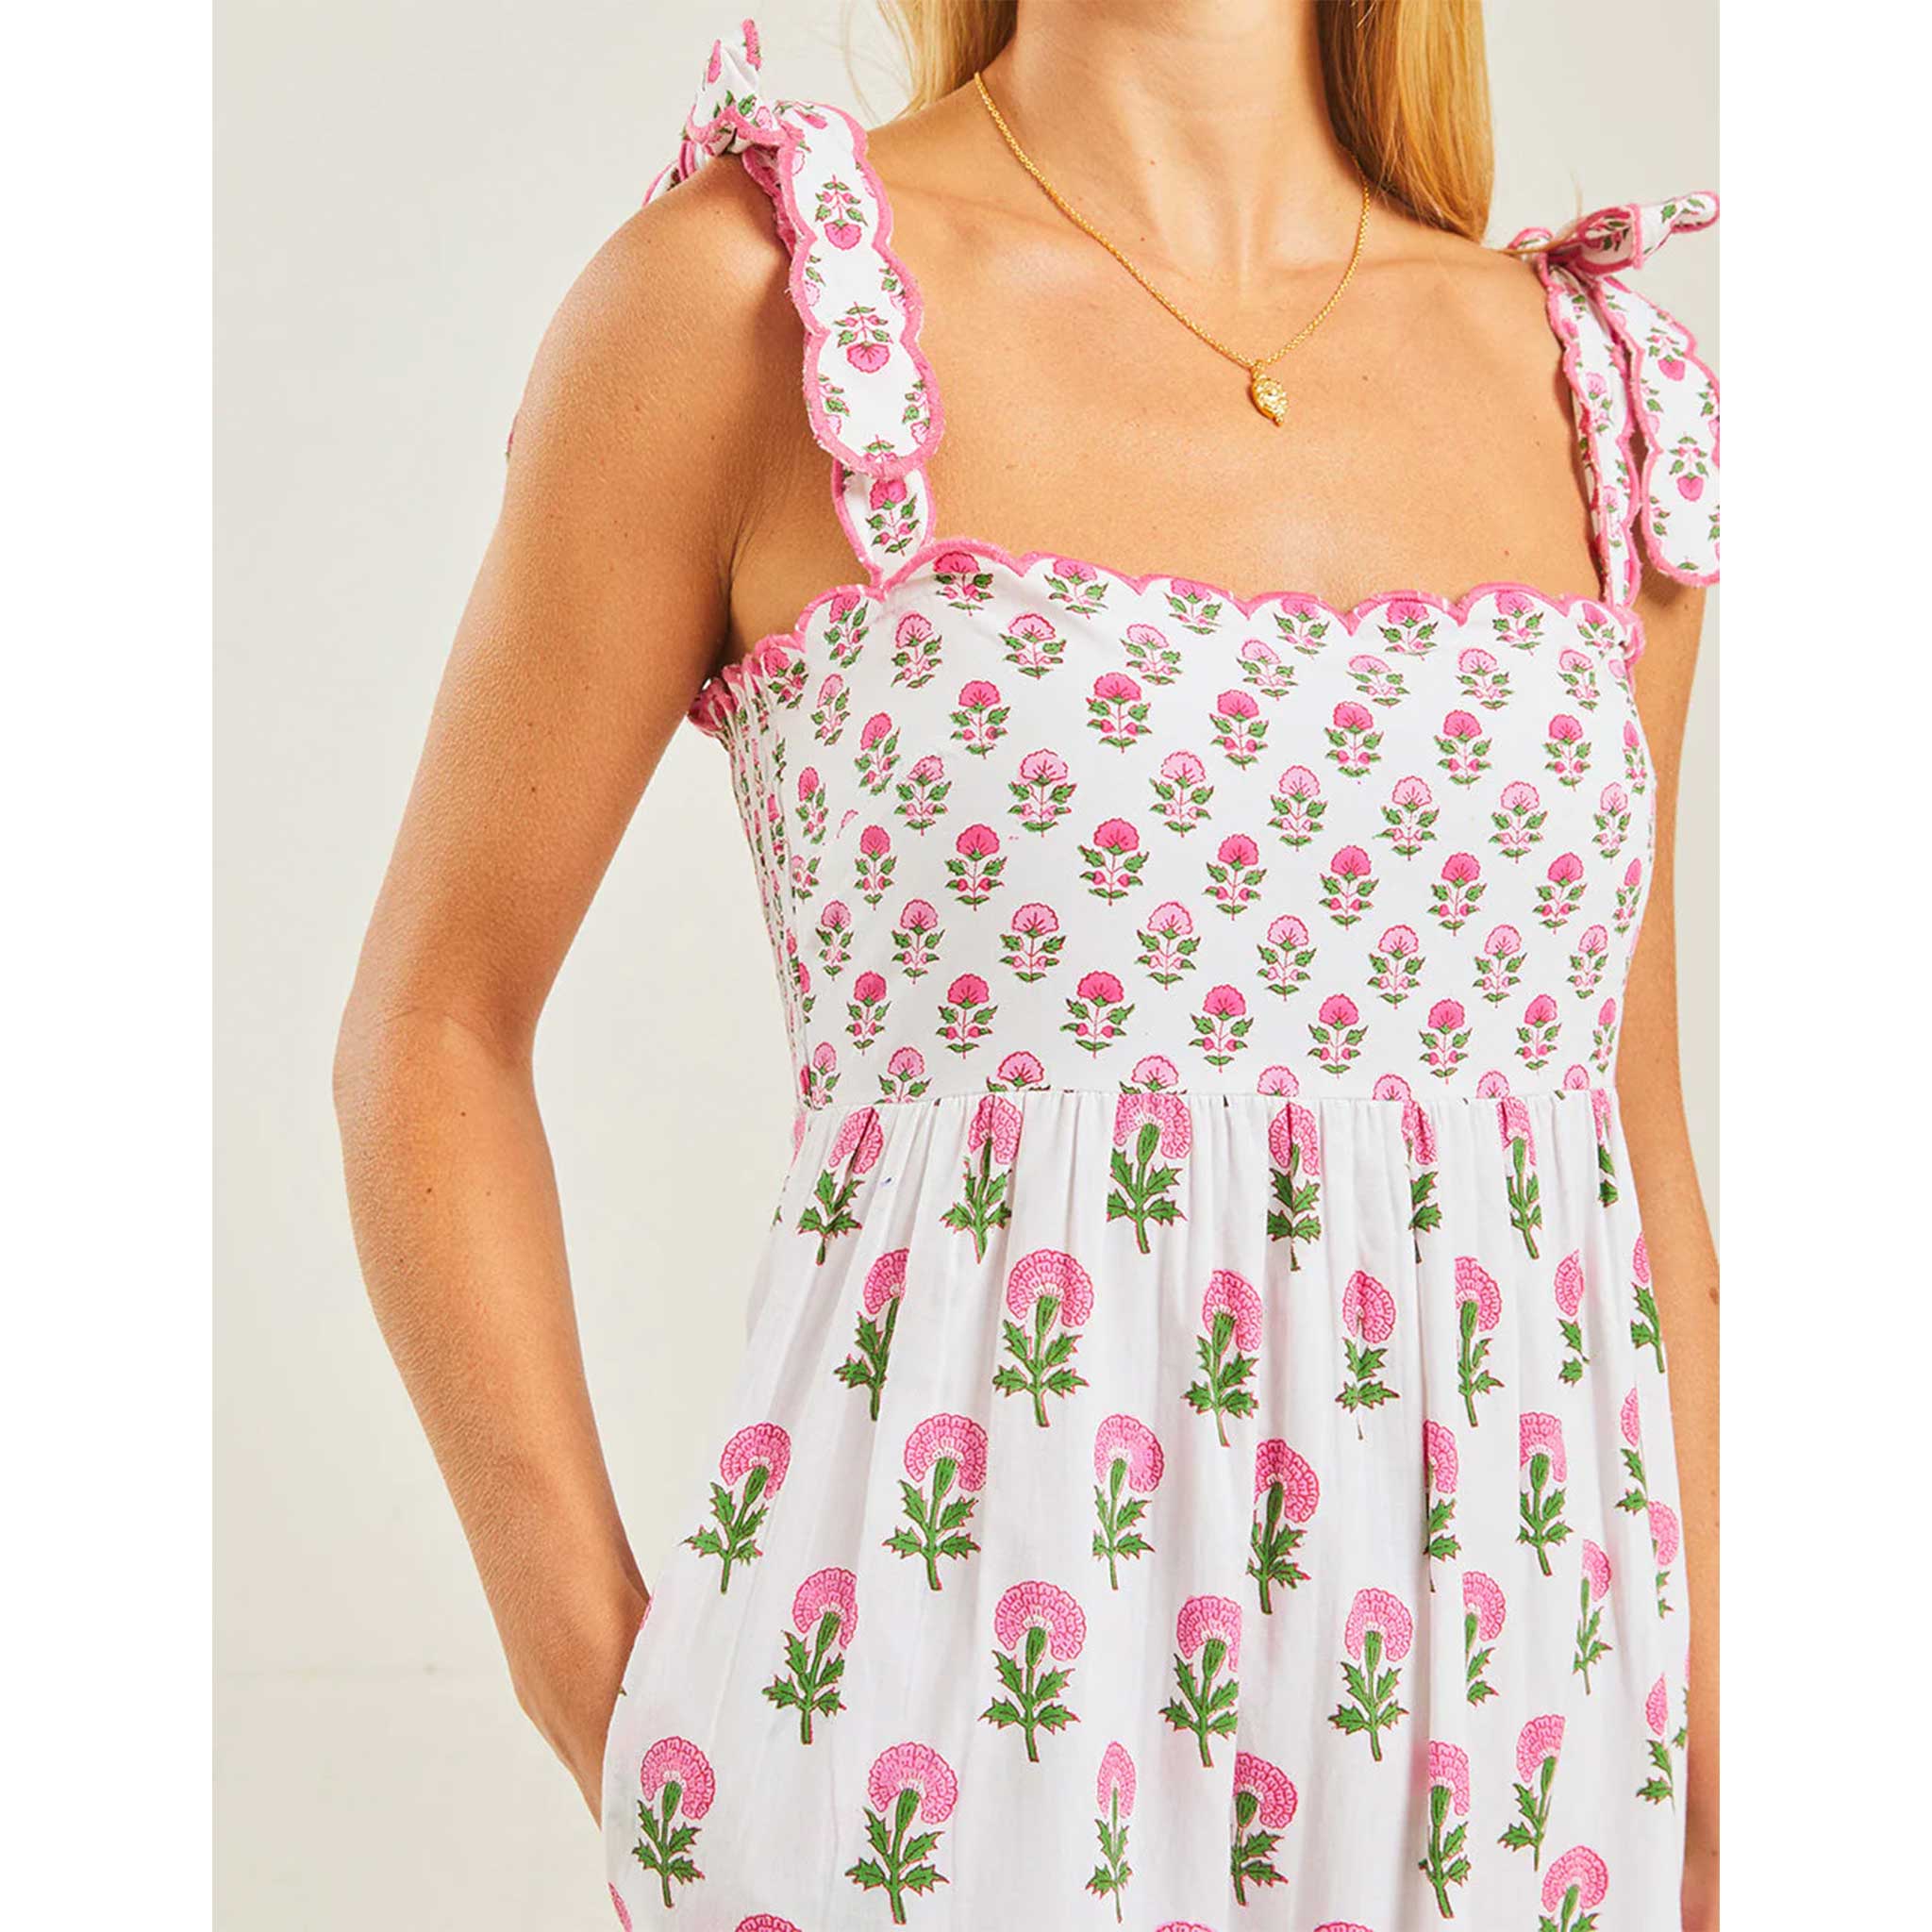 Athens Dress in Hollyhock Mix